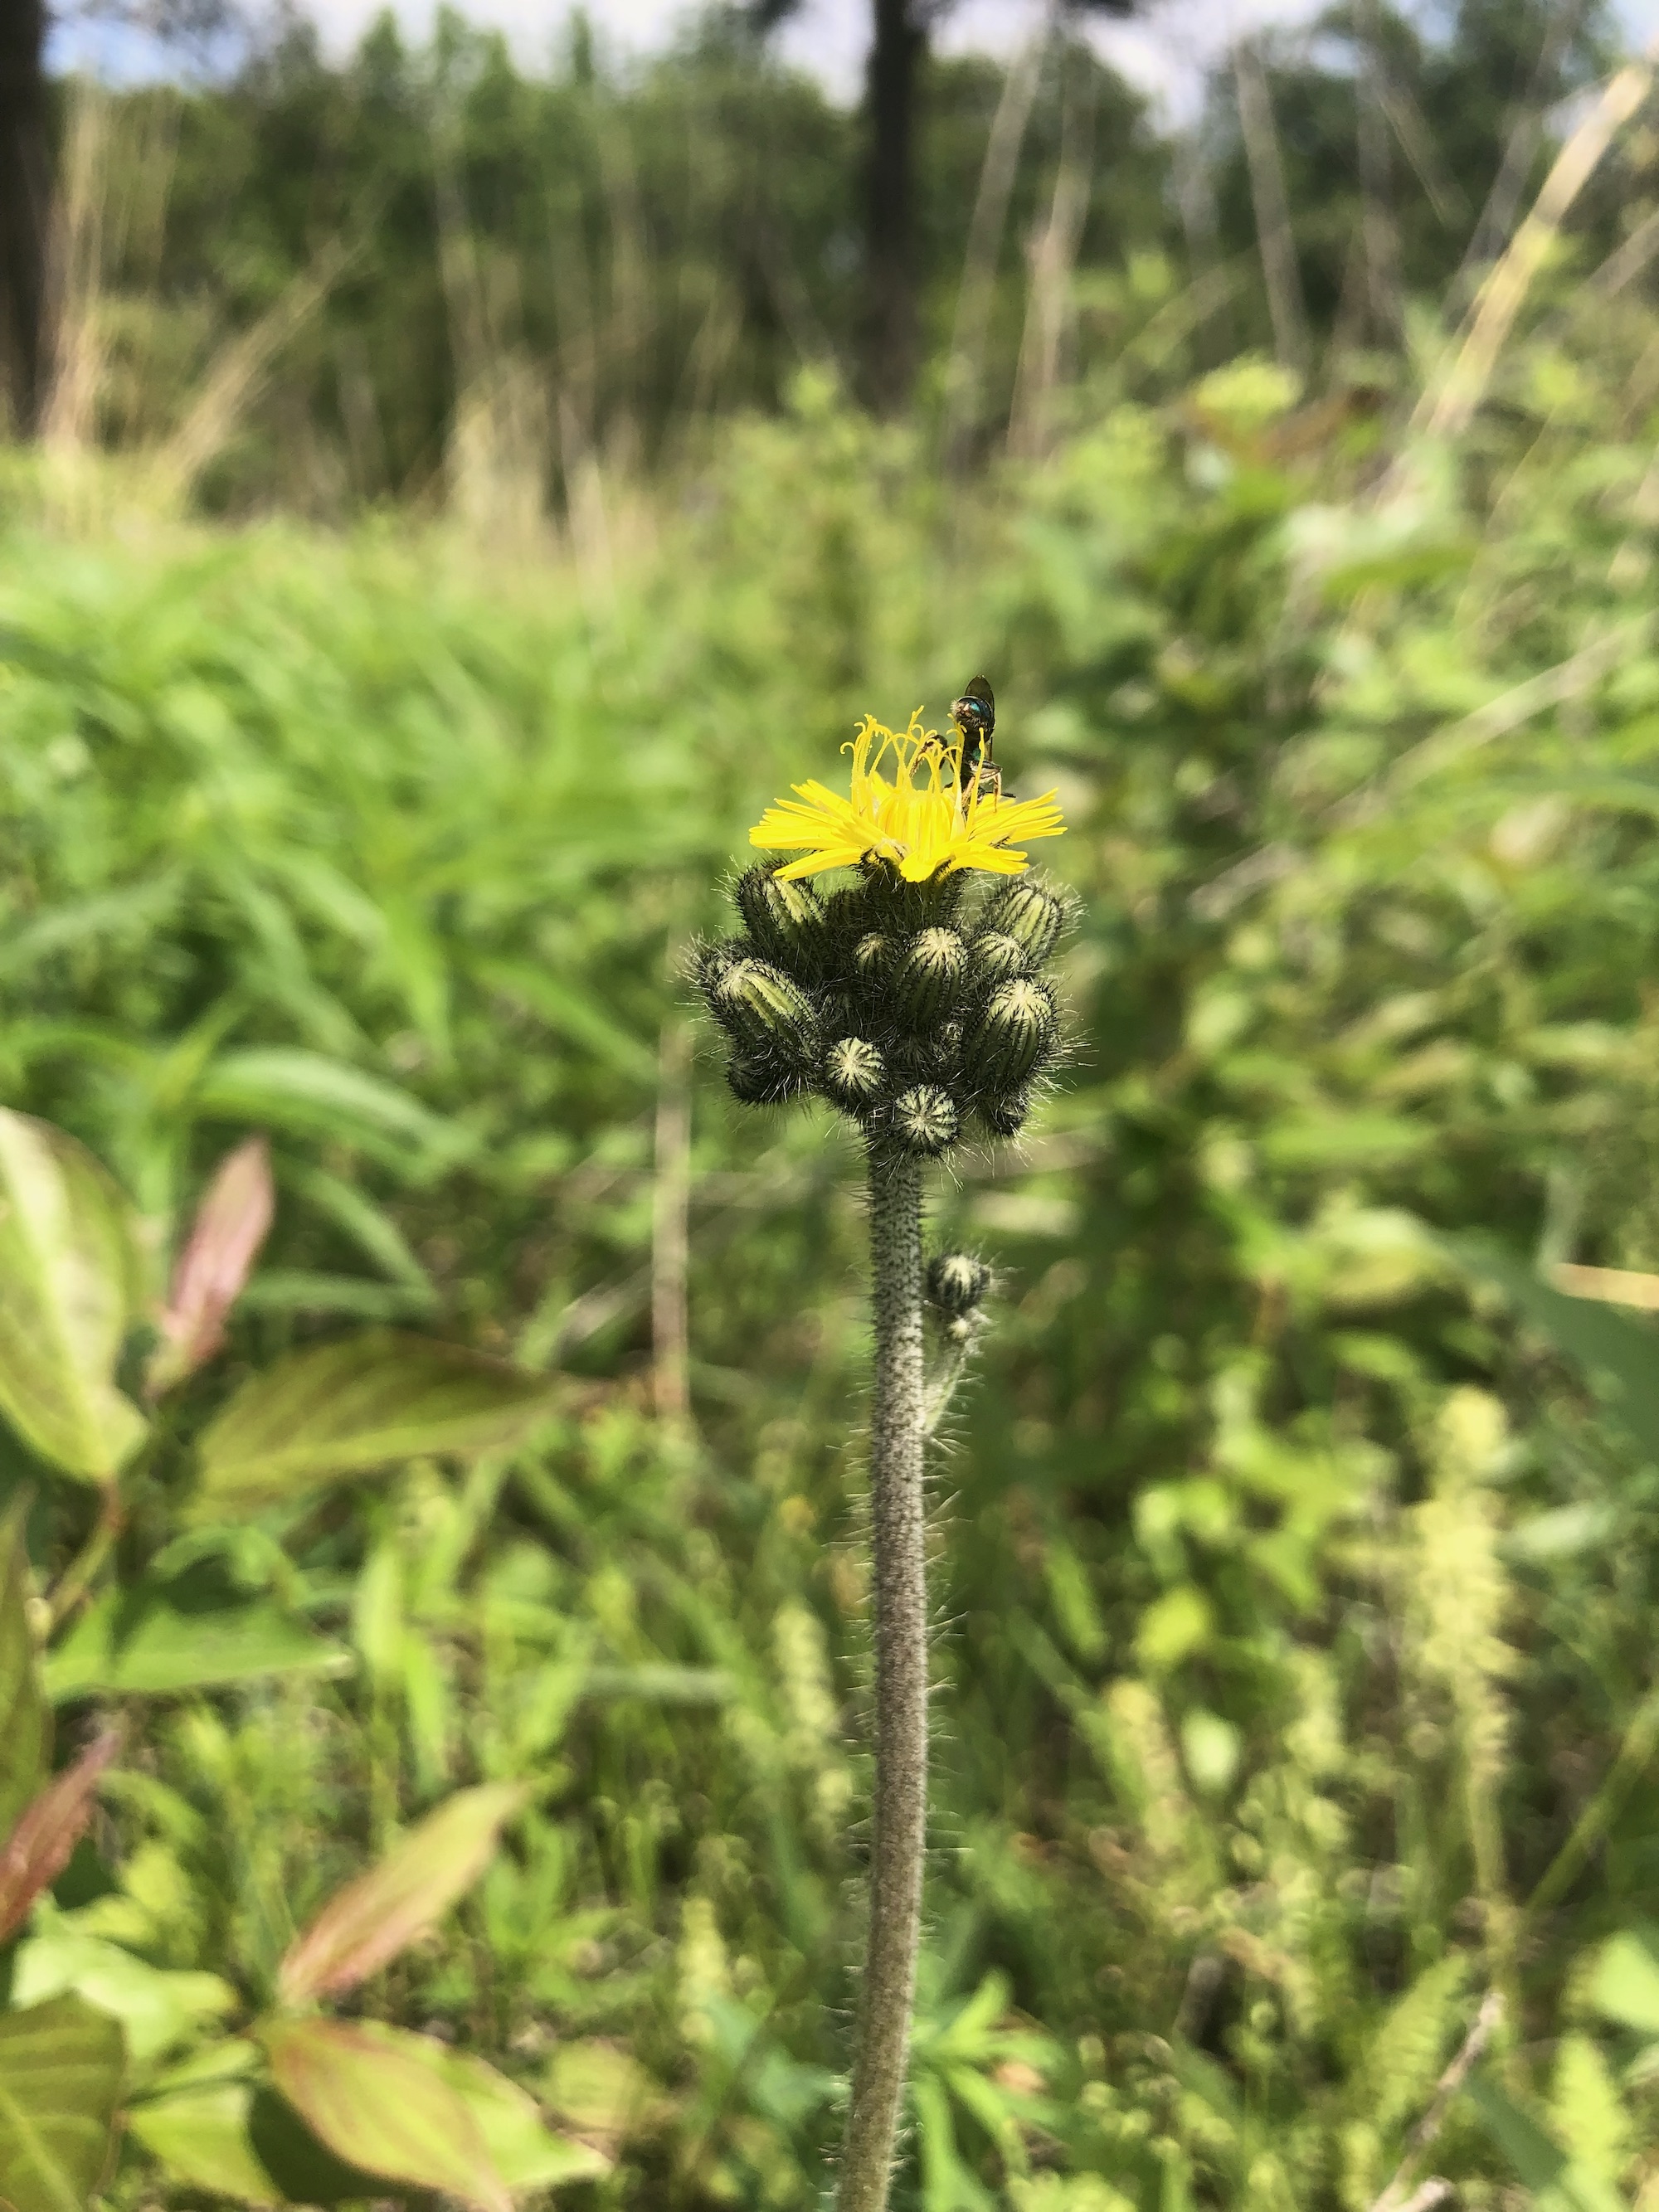 Meadow Hawkweed leaves and stem in the Curtis Prairie in the University of Wisconsin-Madison Arboretum in Madison, Wisconsin on June 7, 2022.